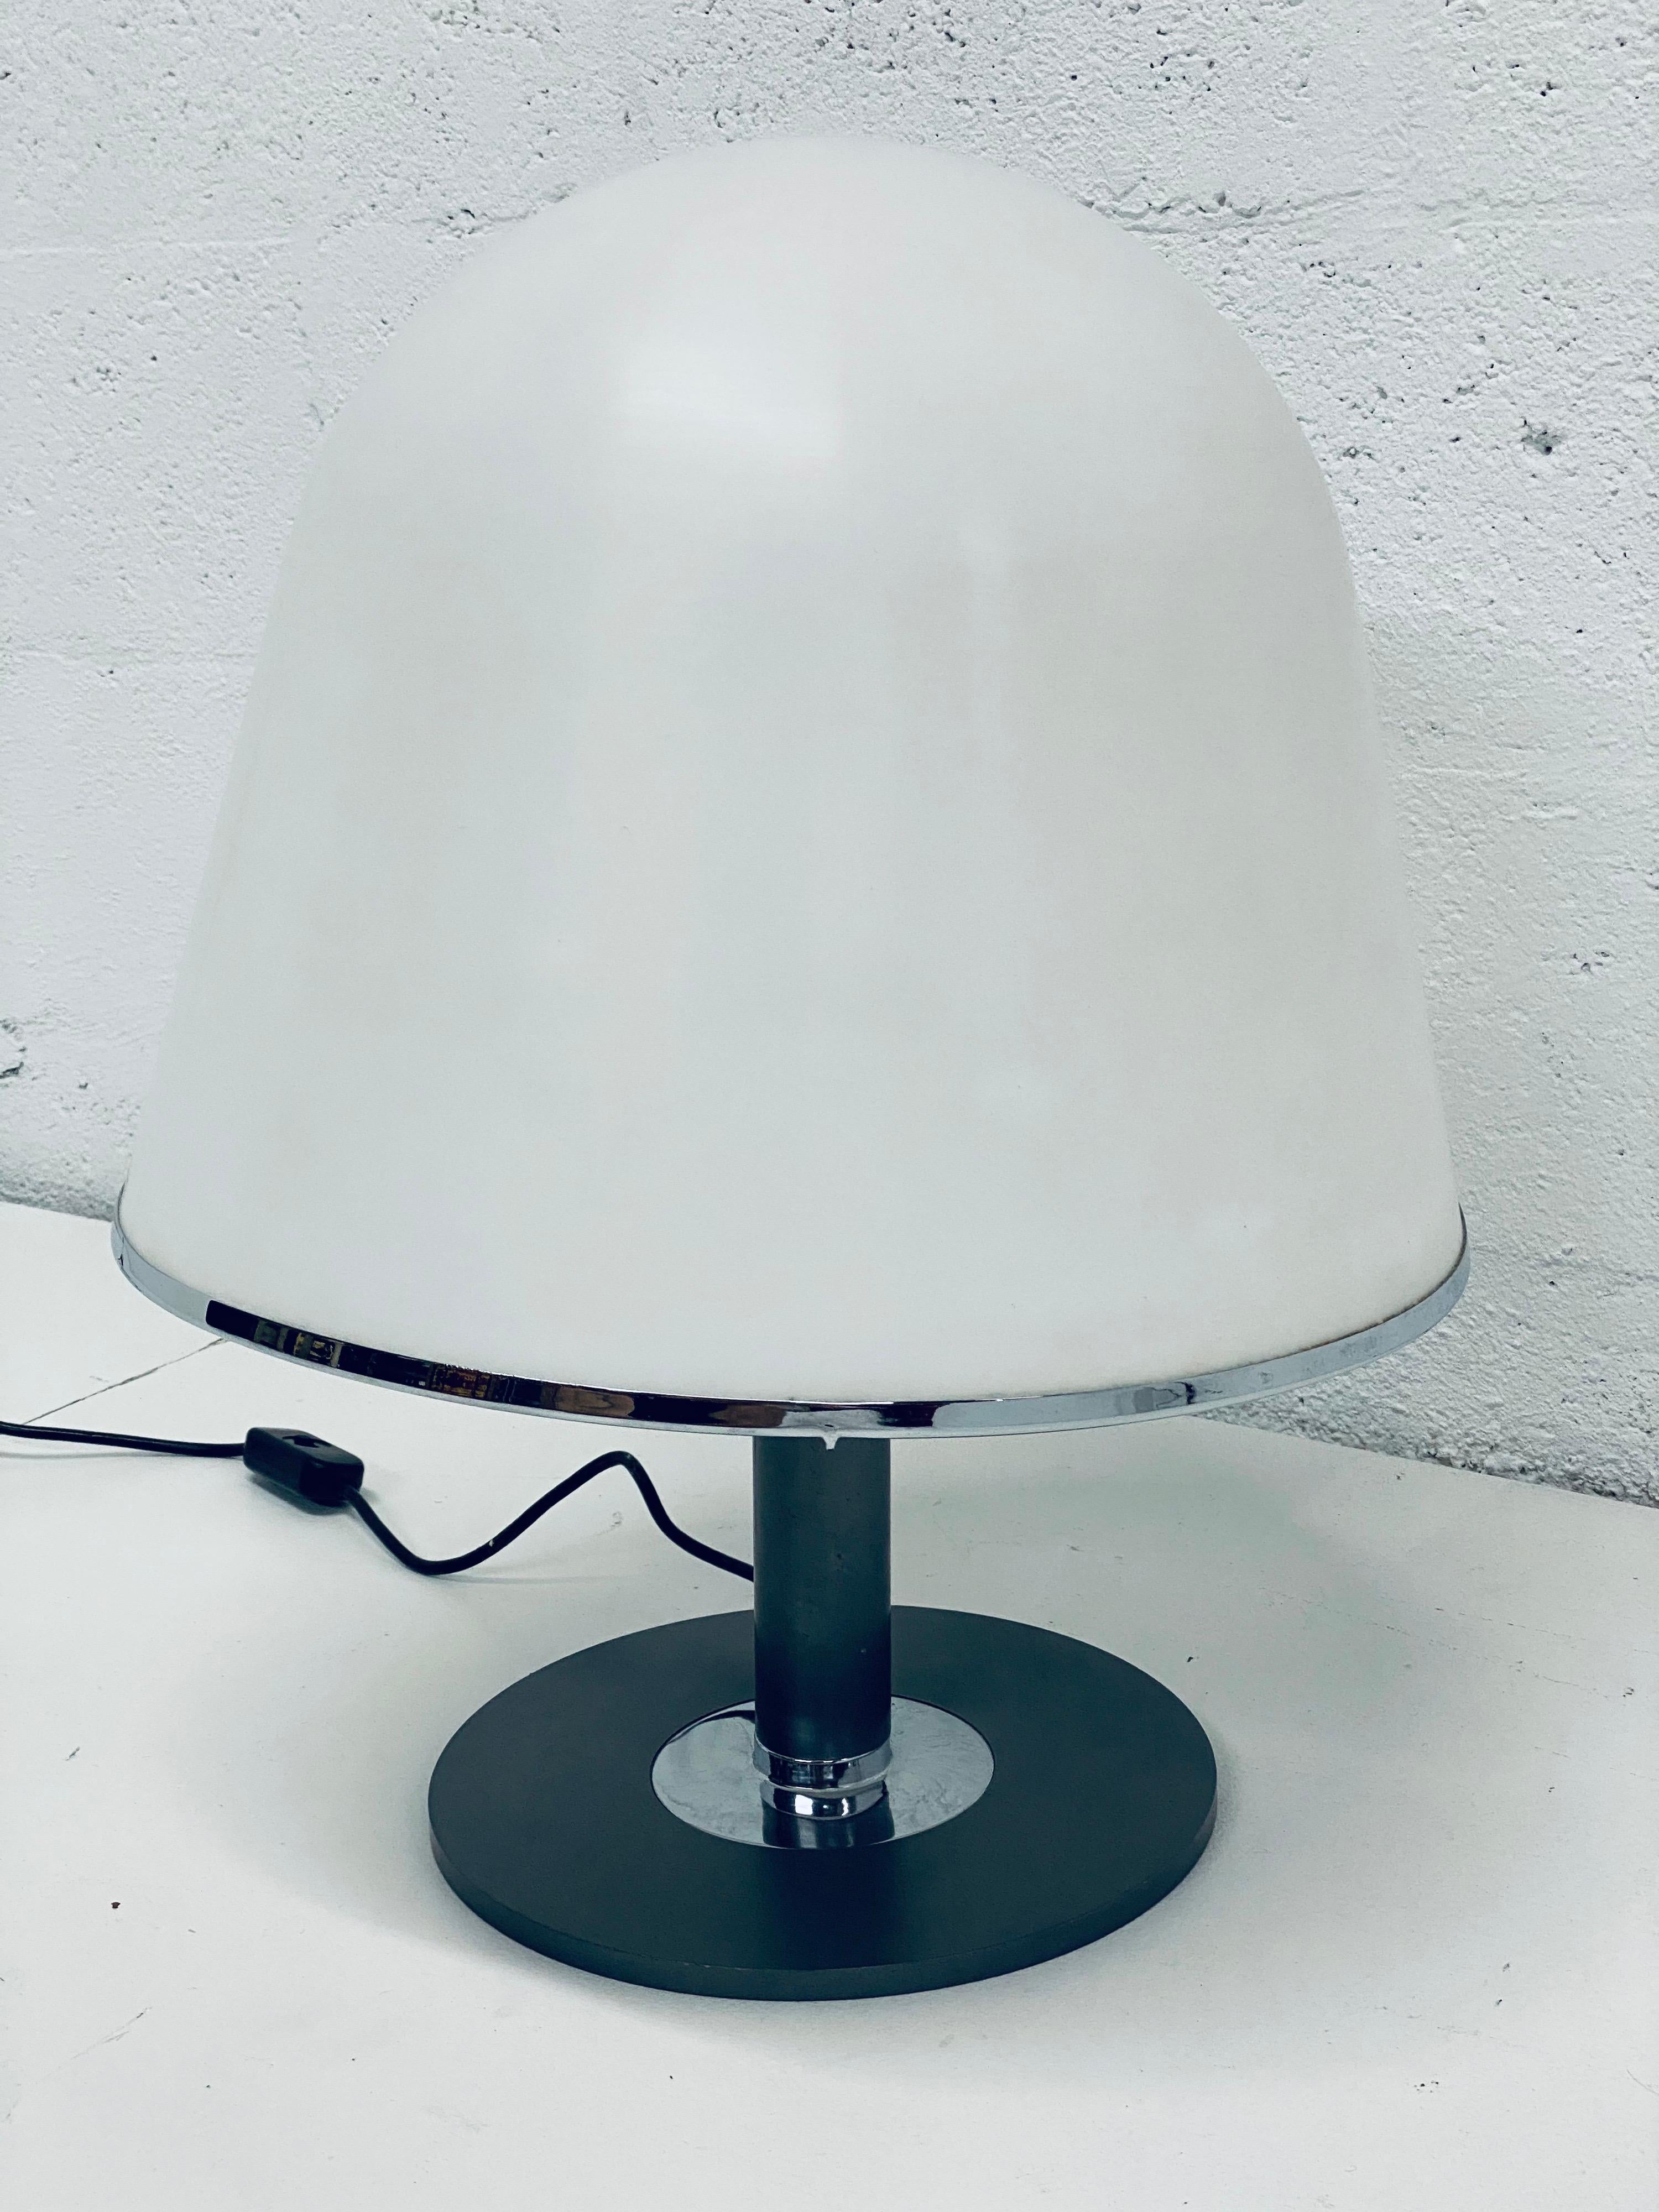 Mid-century Kuala desk or table lamp made of a matte white molded plastic dome shade on a gunmetal and polished steel base designed by Franco Bresciani for iGuzzini. Wired for USA.